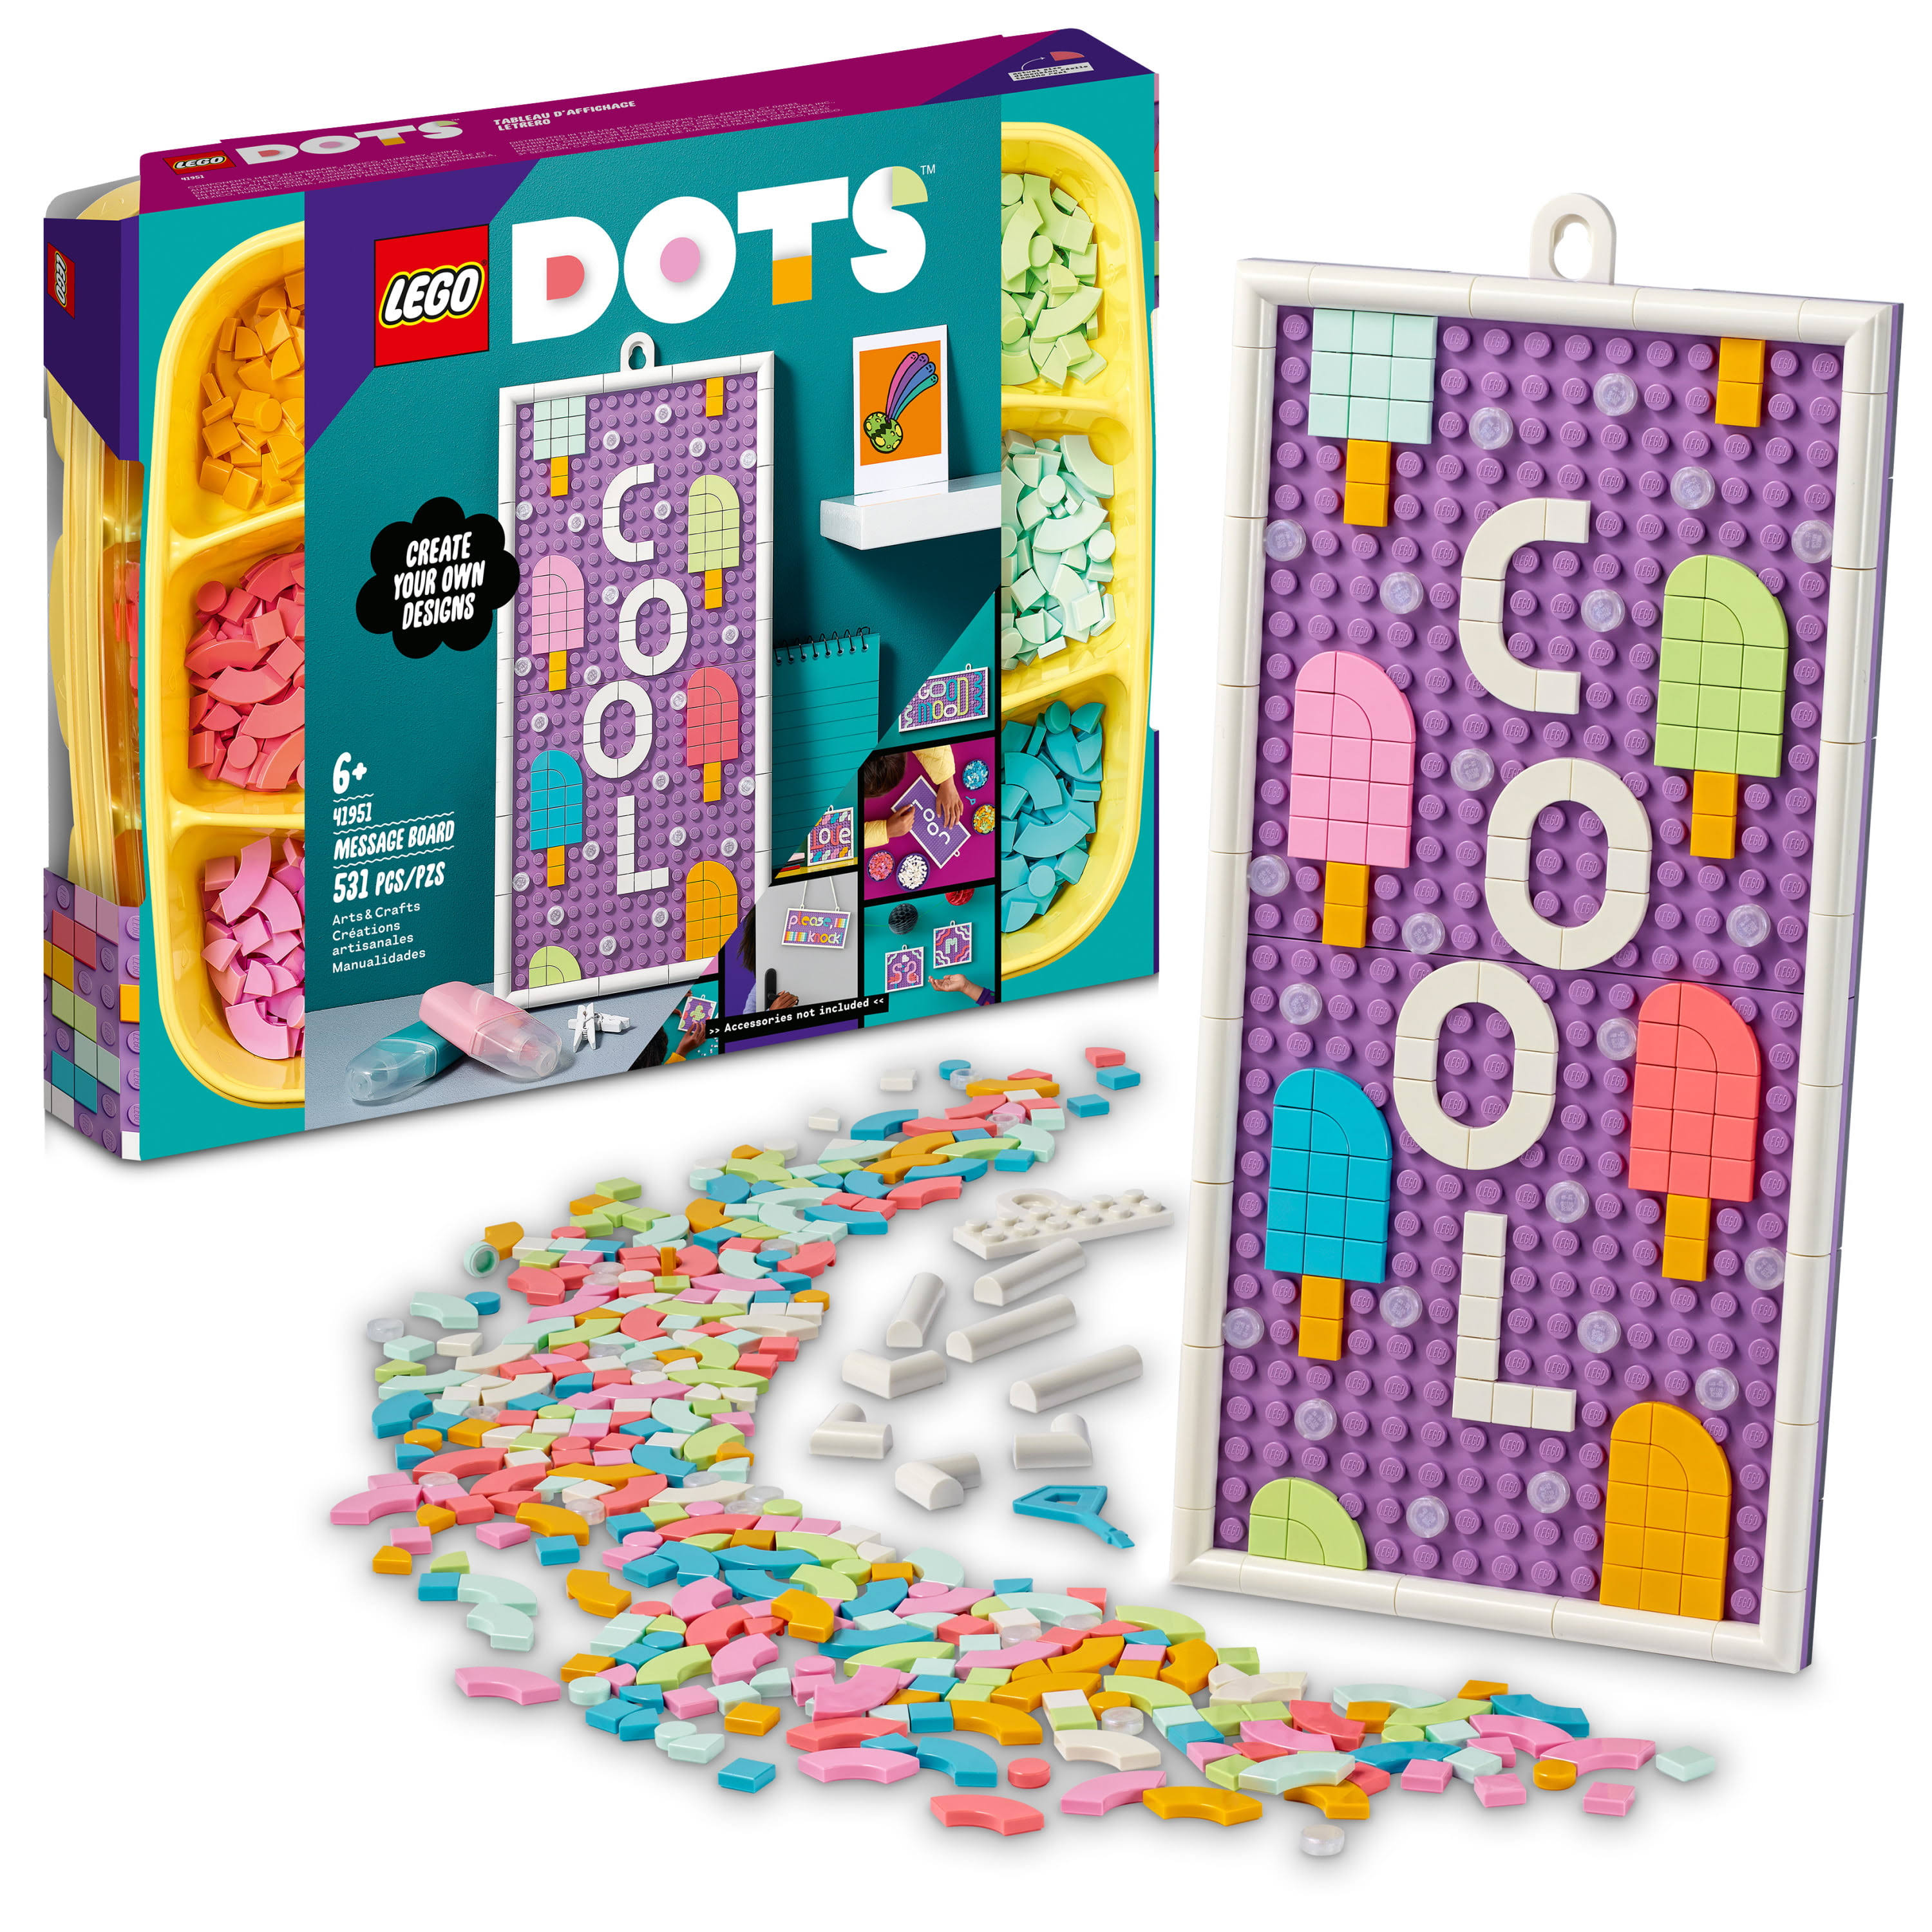 Lego 41951 Dots Message Board